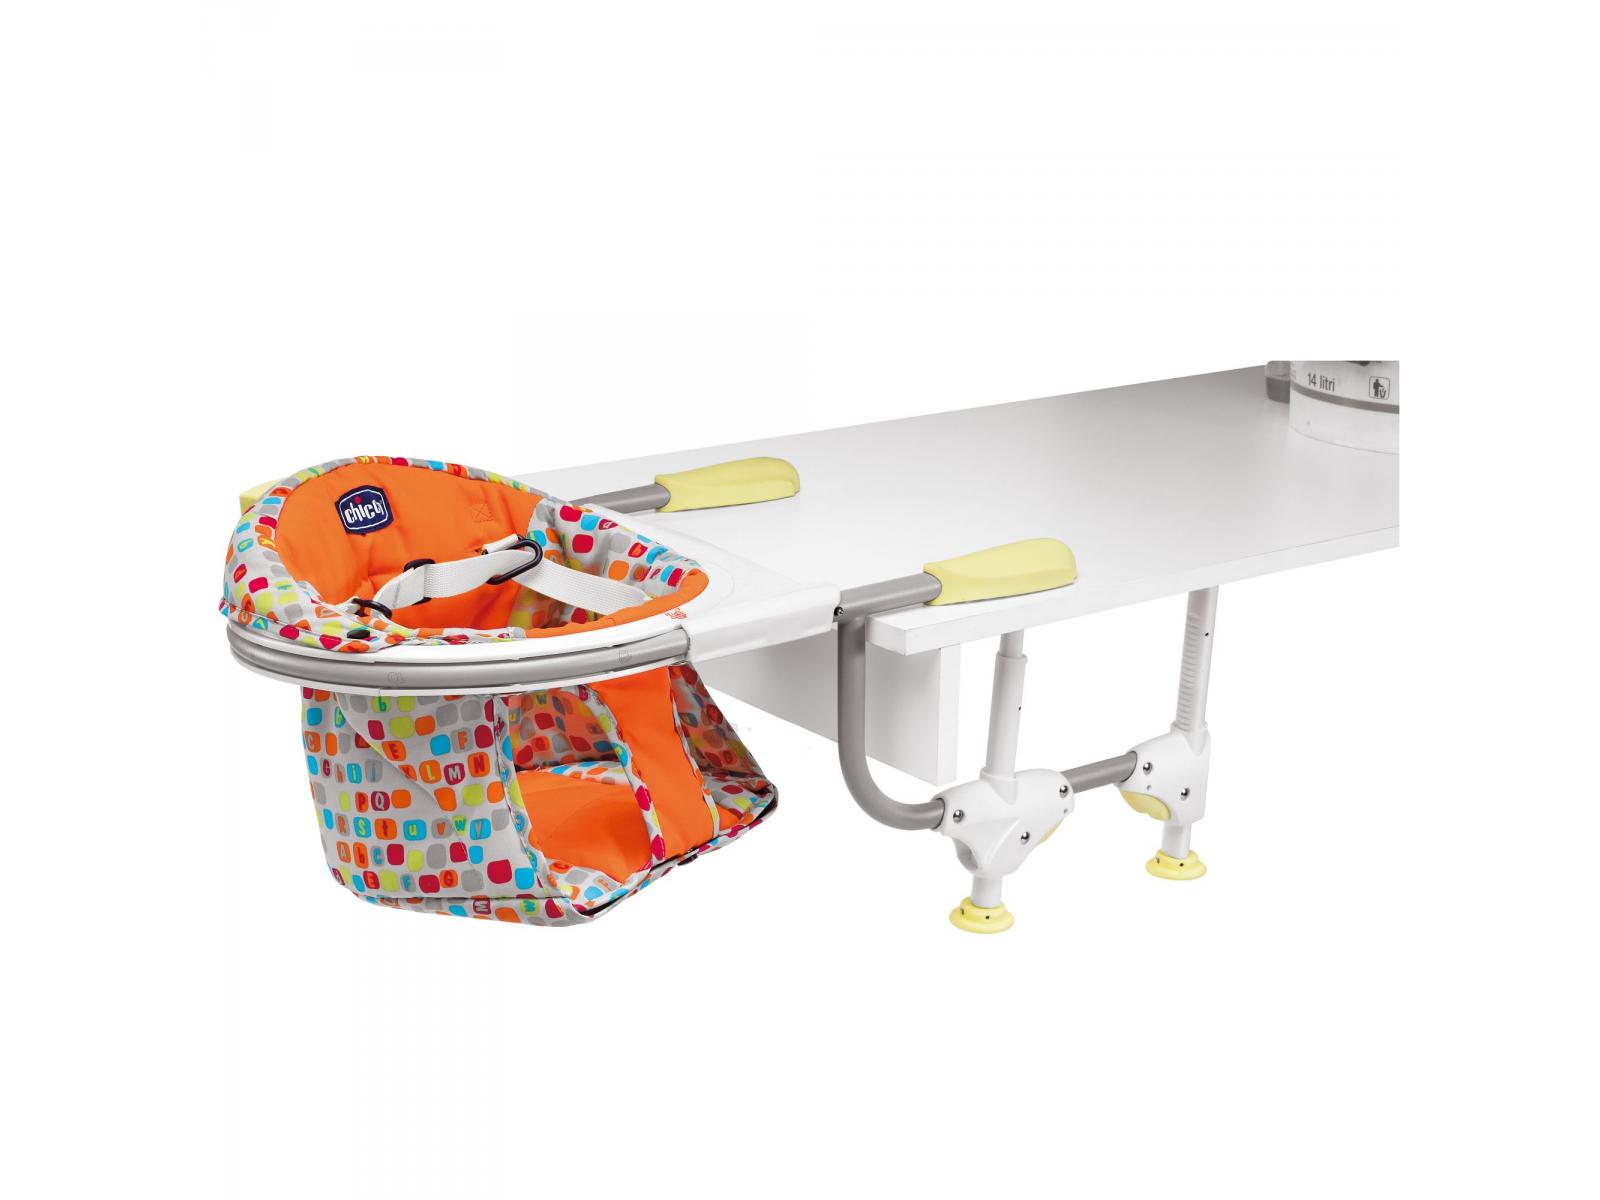 Siege de table Chicco candy